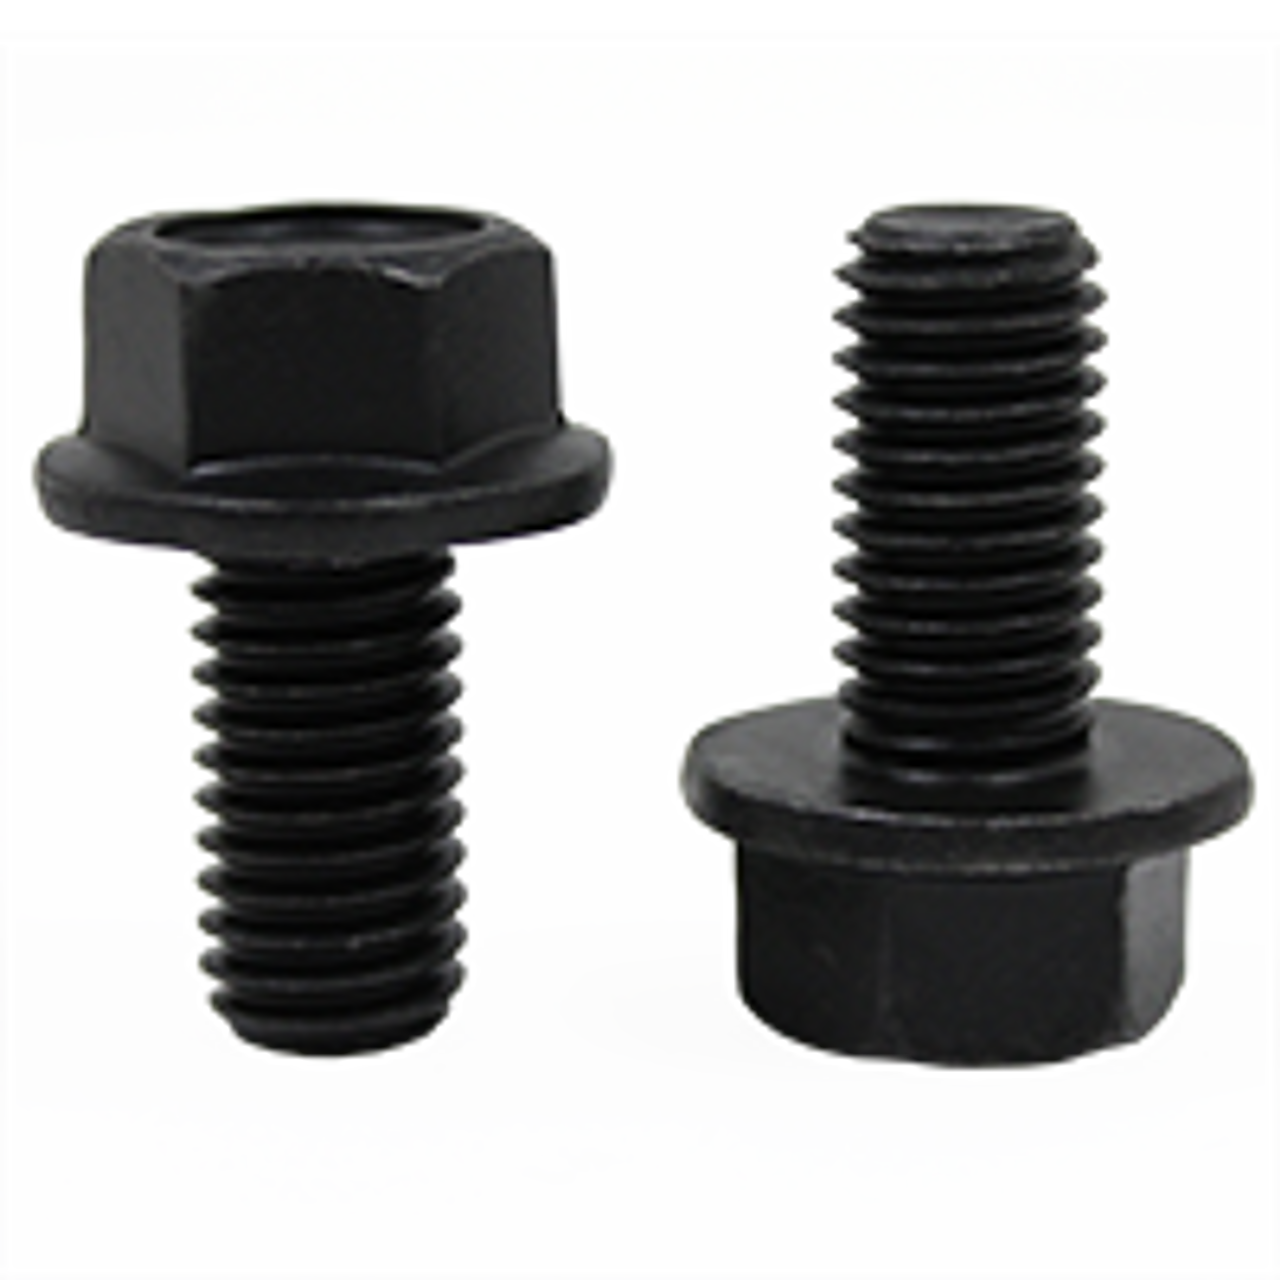 5/16"-18 x 1-1/4" Gade Frame Bolts AFT Fasteners